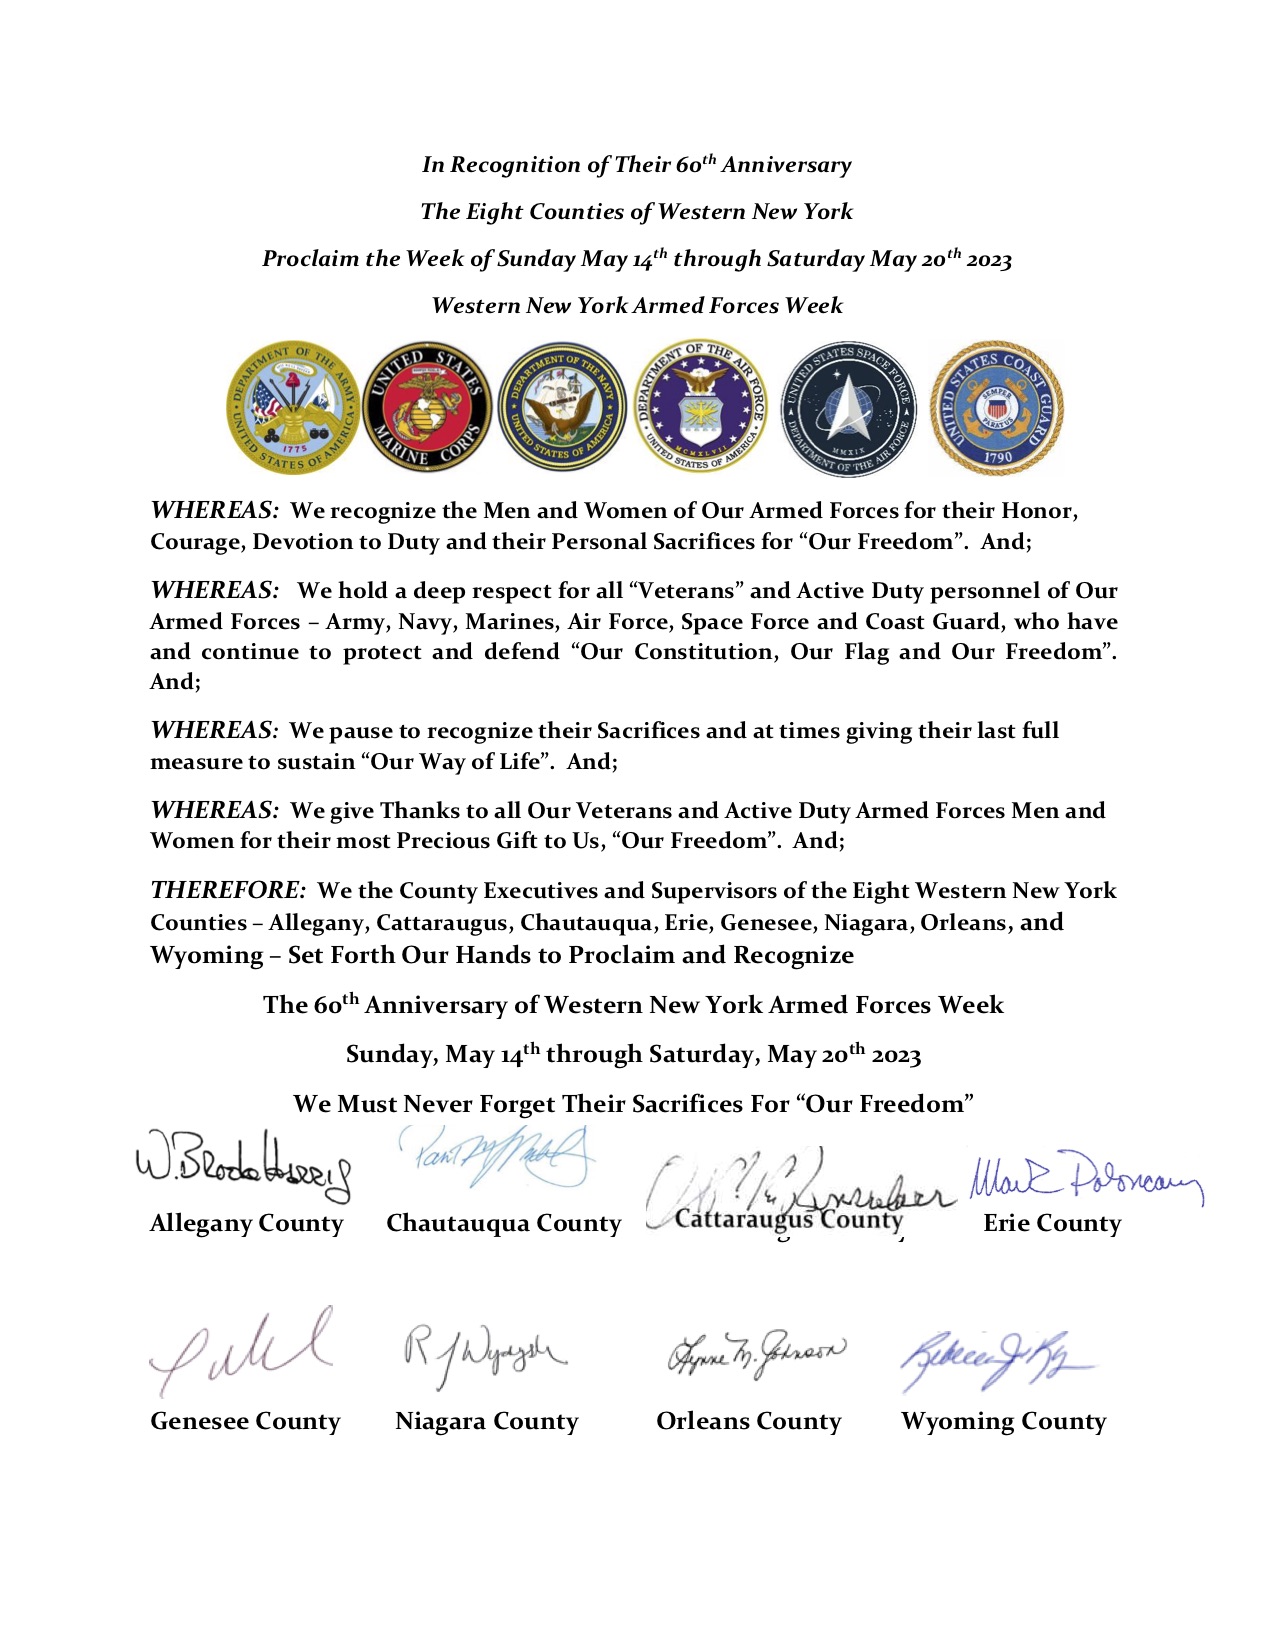 Procamation WNY ARMED FORCES WEEK PROCLAMATION - Working Copy